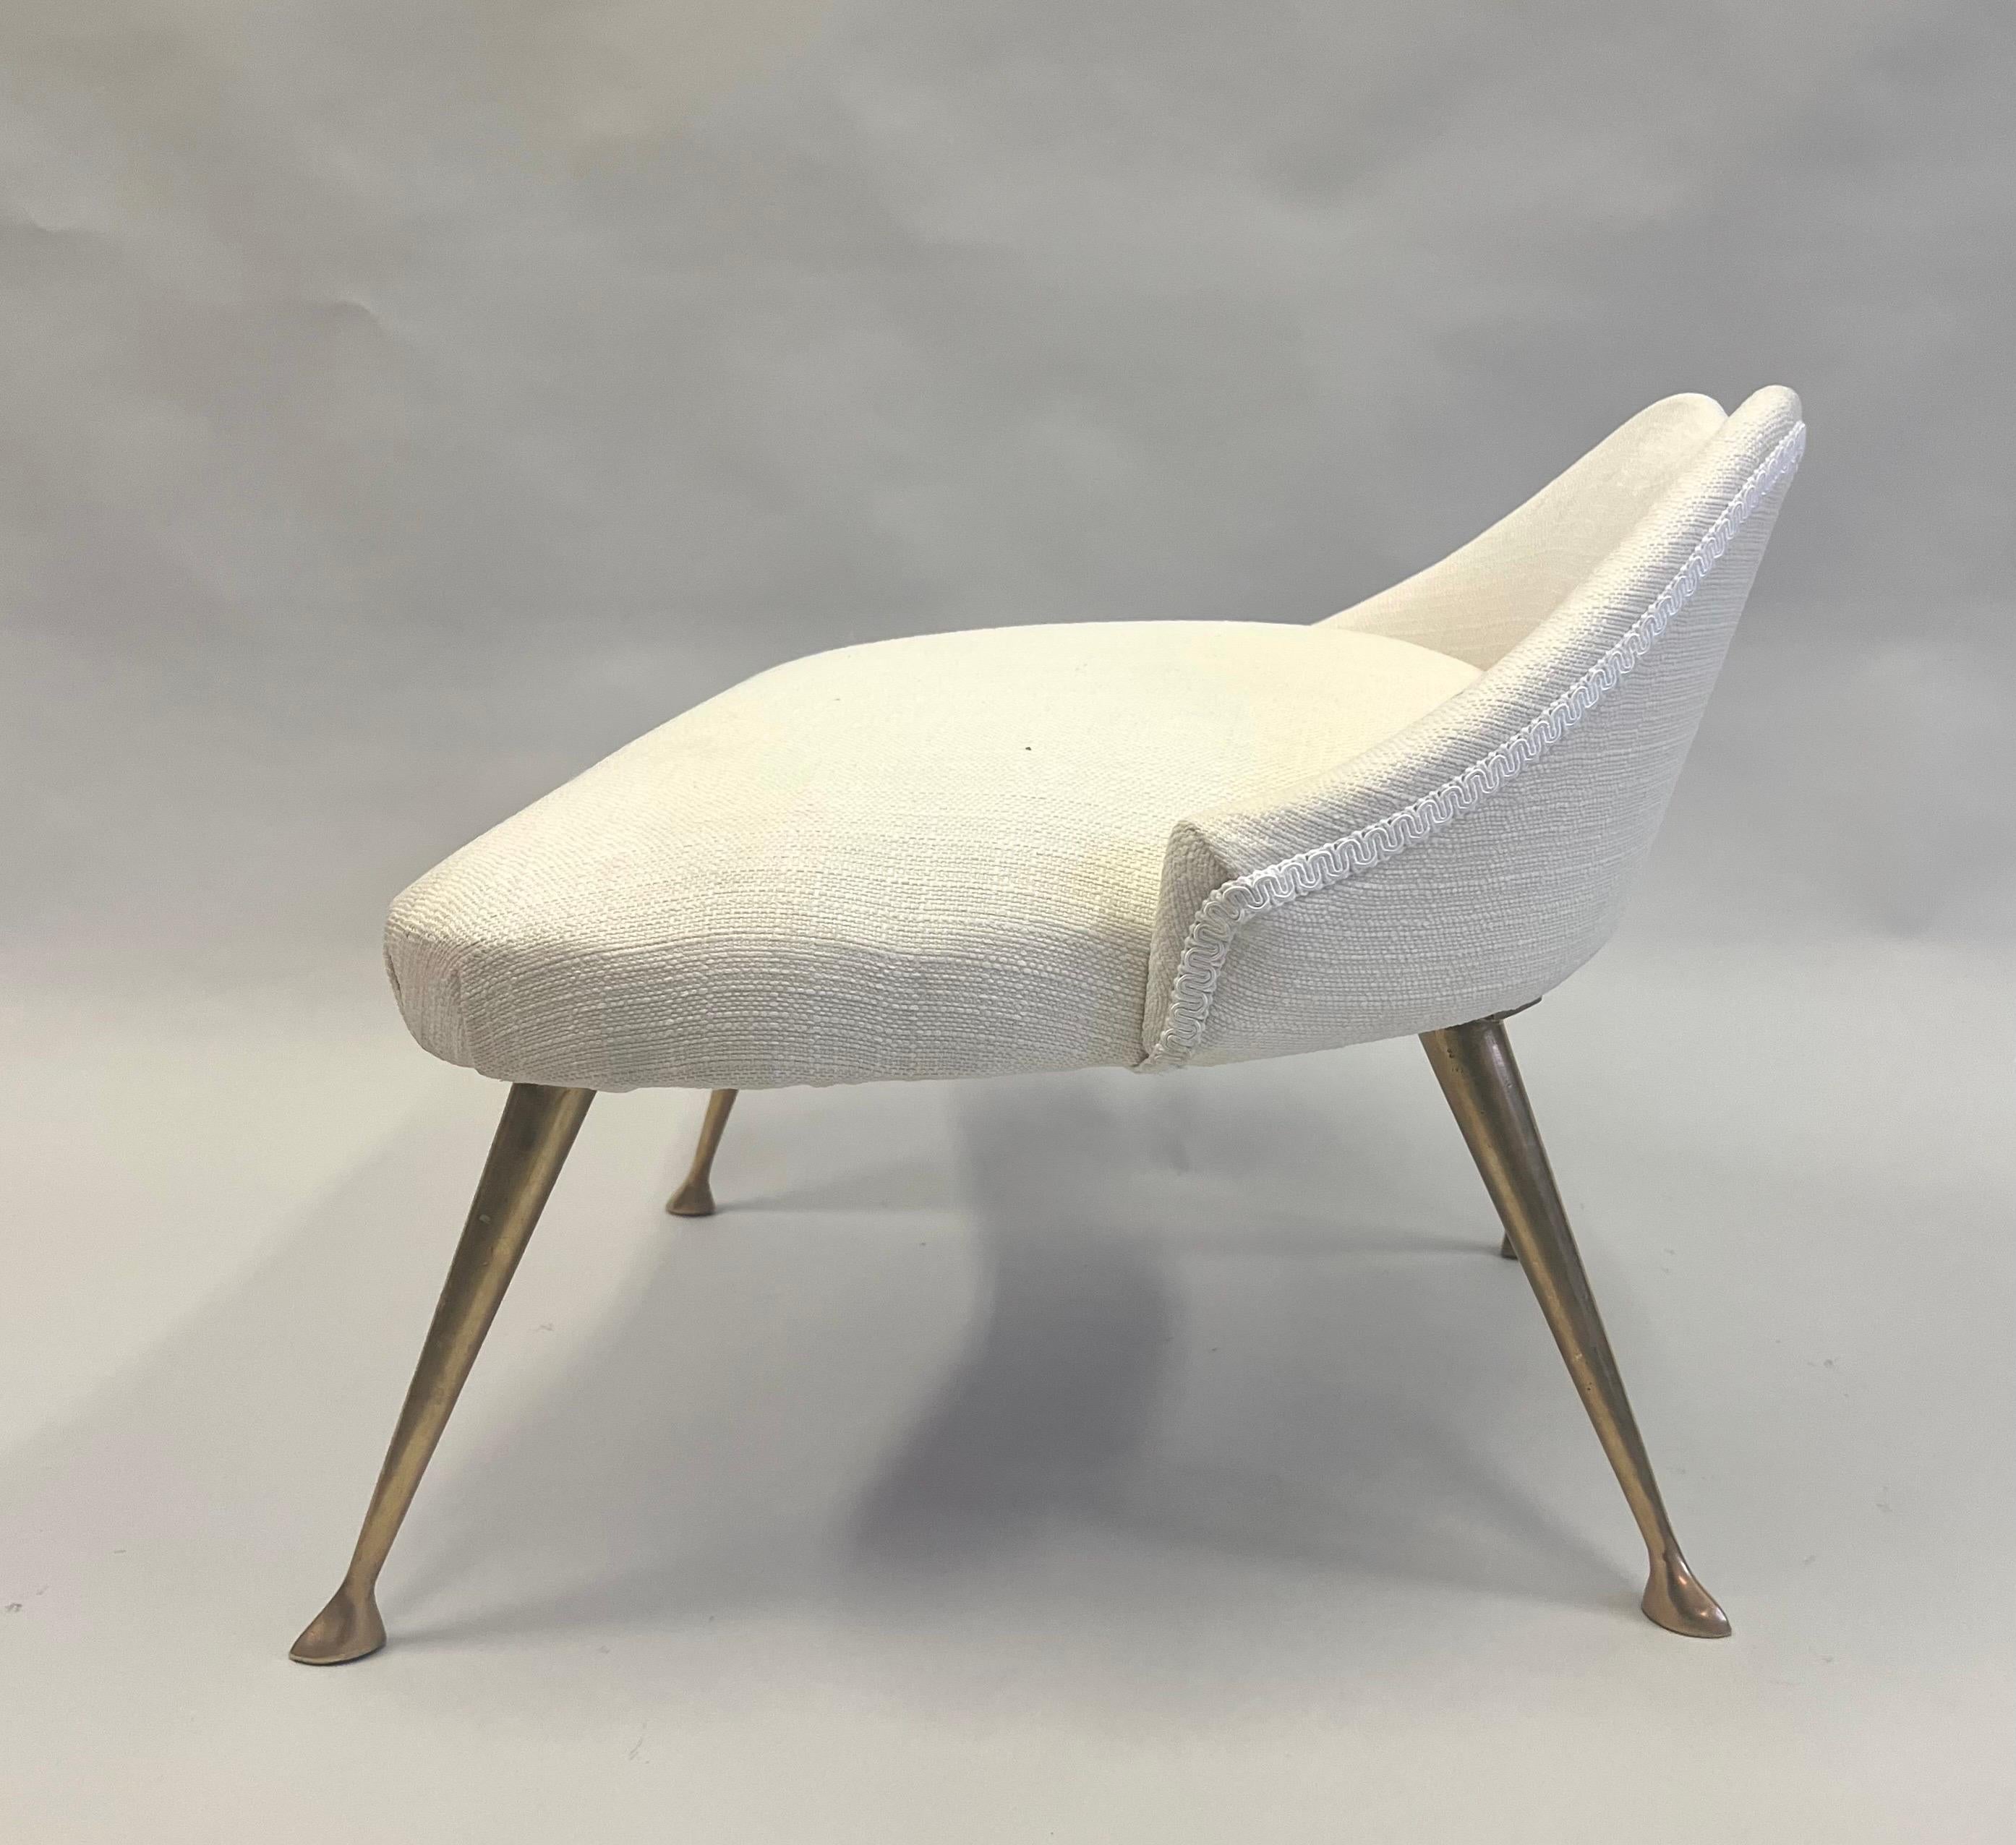 Italian Mid-CenturyModern Brass & Cotton Vanity Chair Attributed to Marco Zanuso For Sale 6